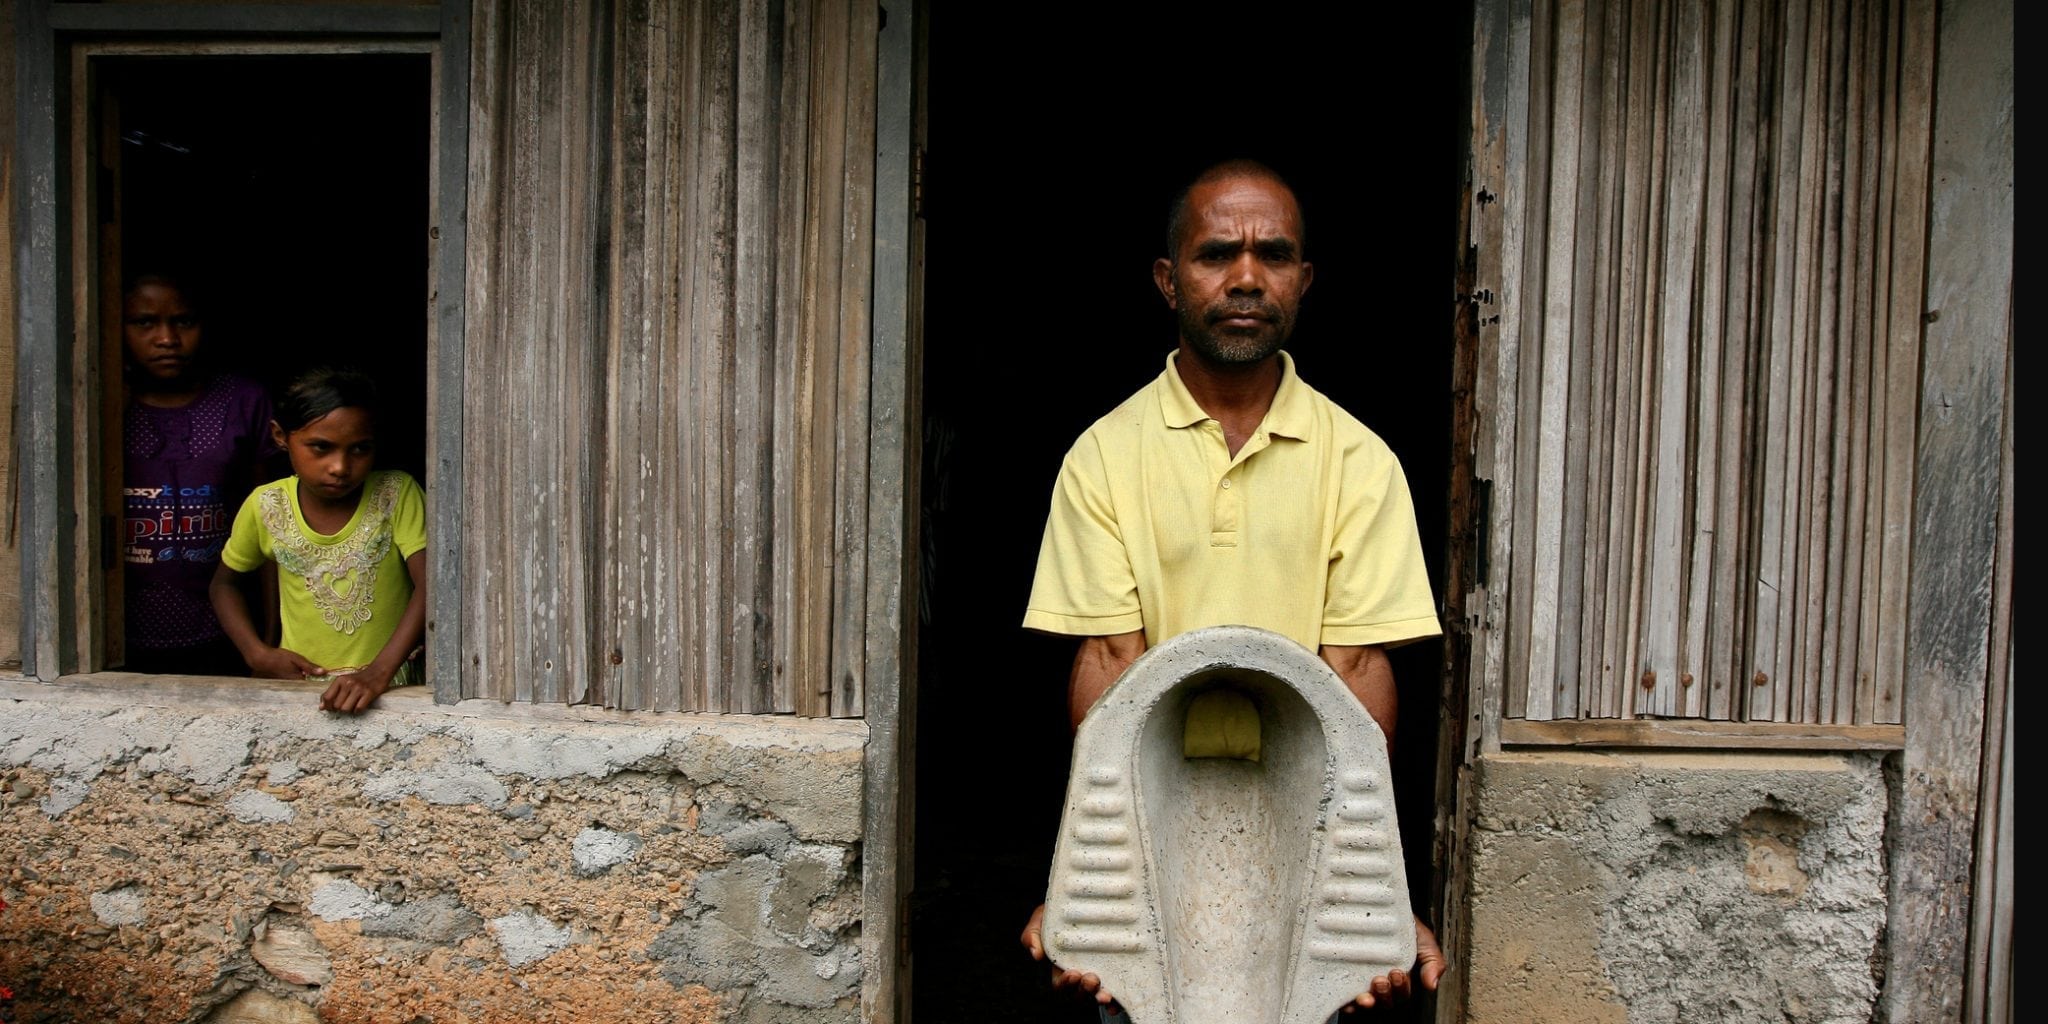 Antonia Dos Santos holds up a toilet in front of his home